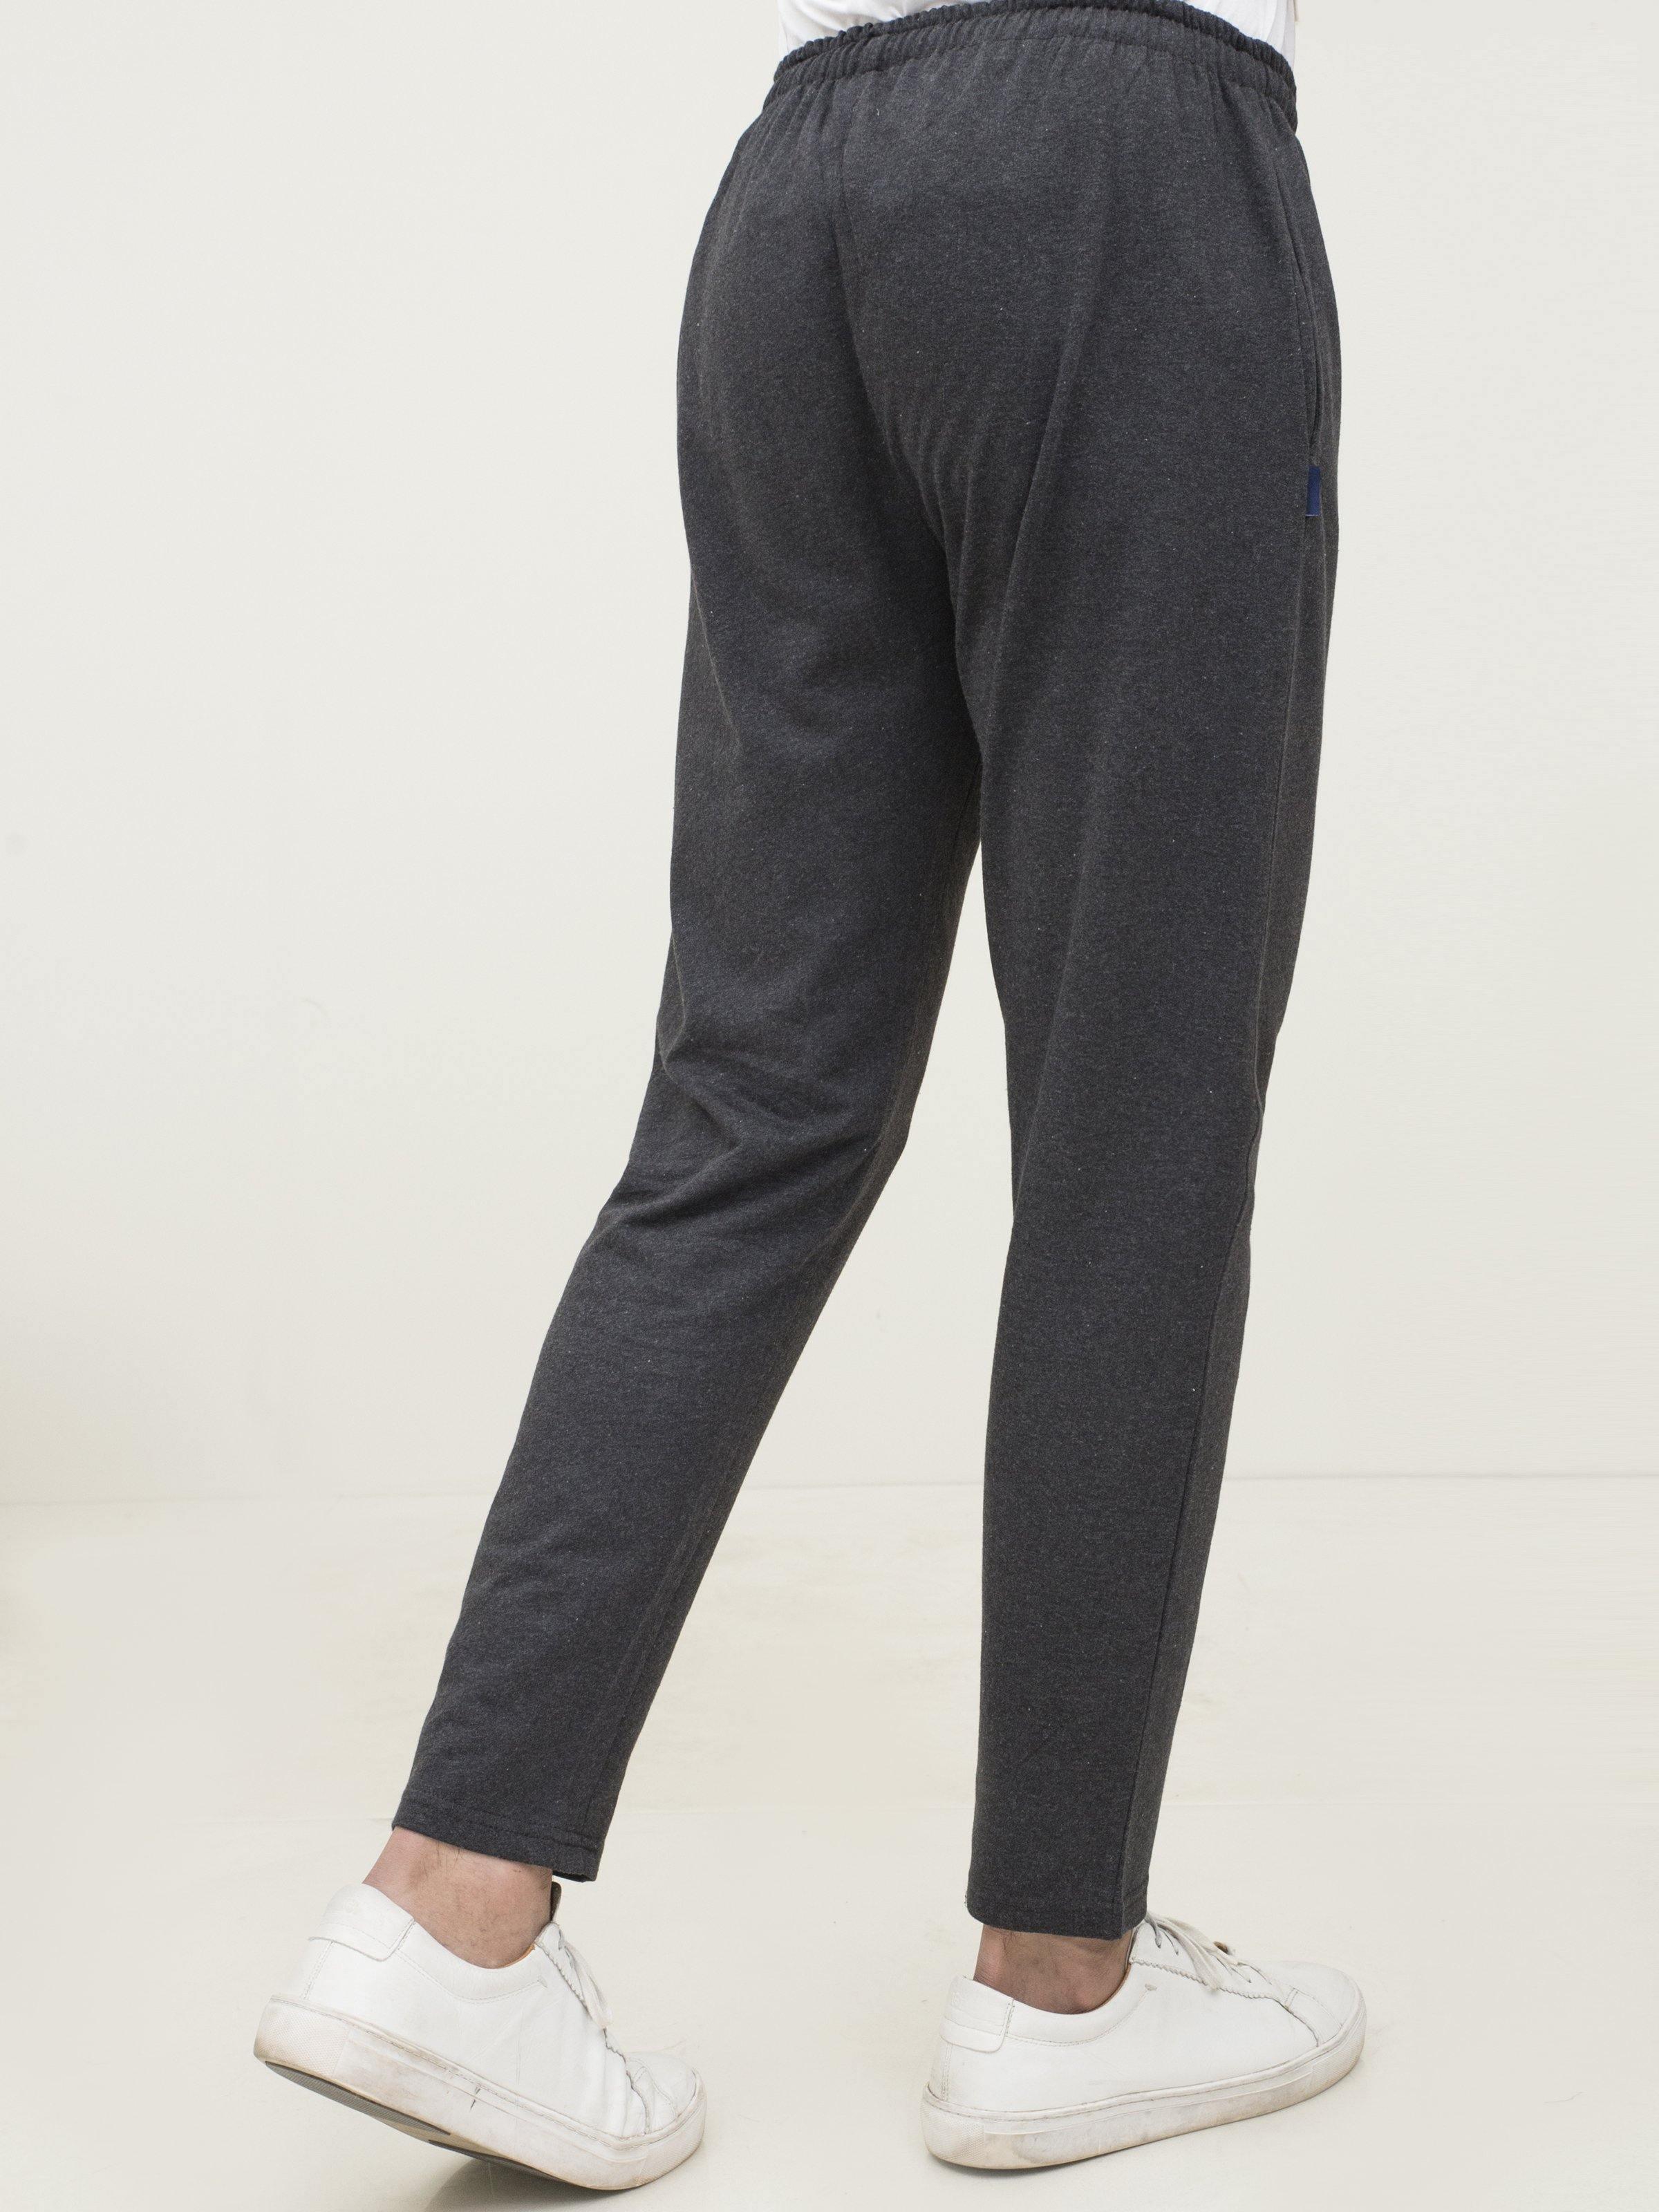 CASUAL TROUSER KNITE SLEEPWEAR CHARCOAL MELANGE at Charcoal Clothing